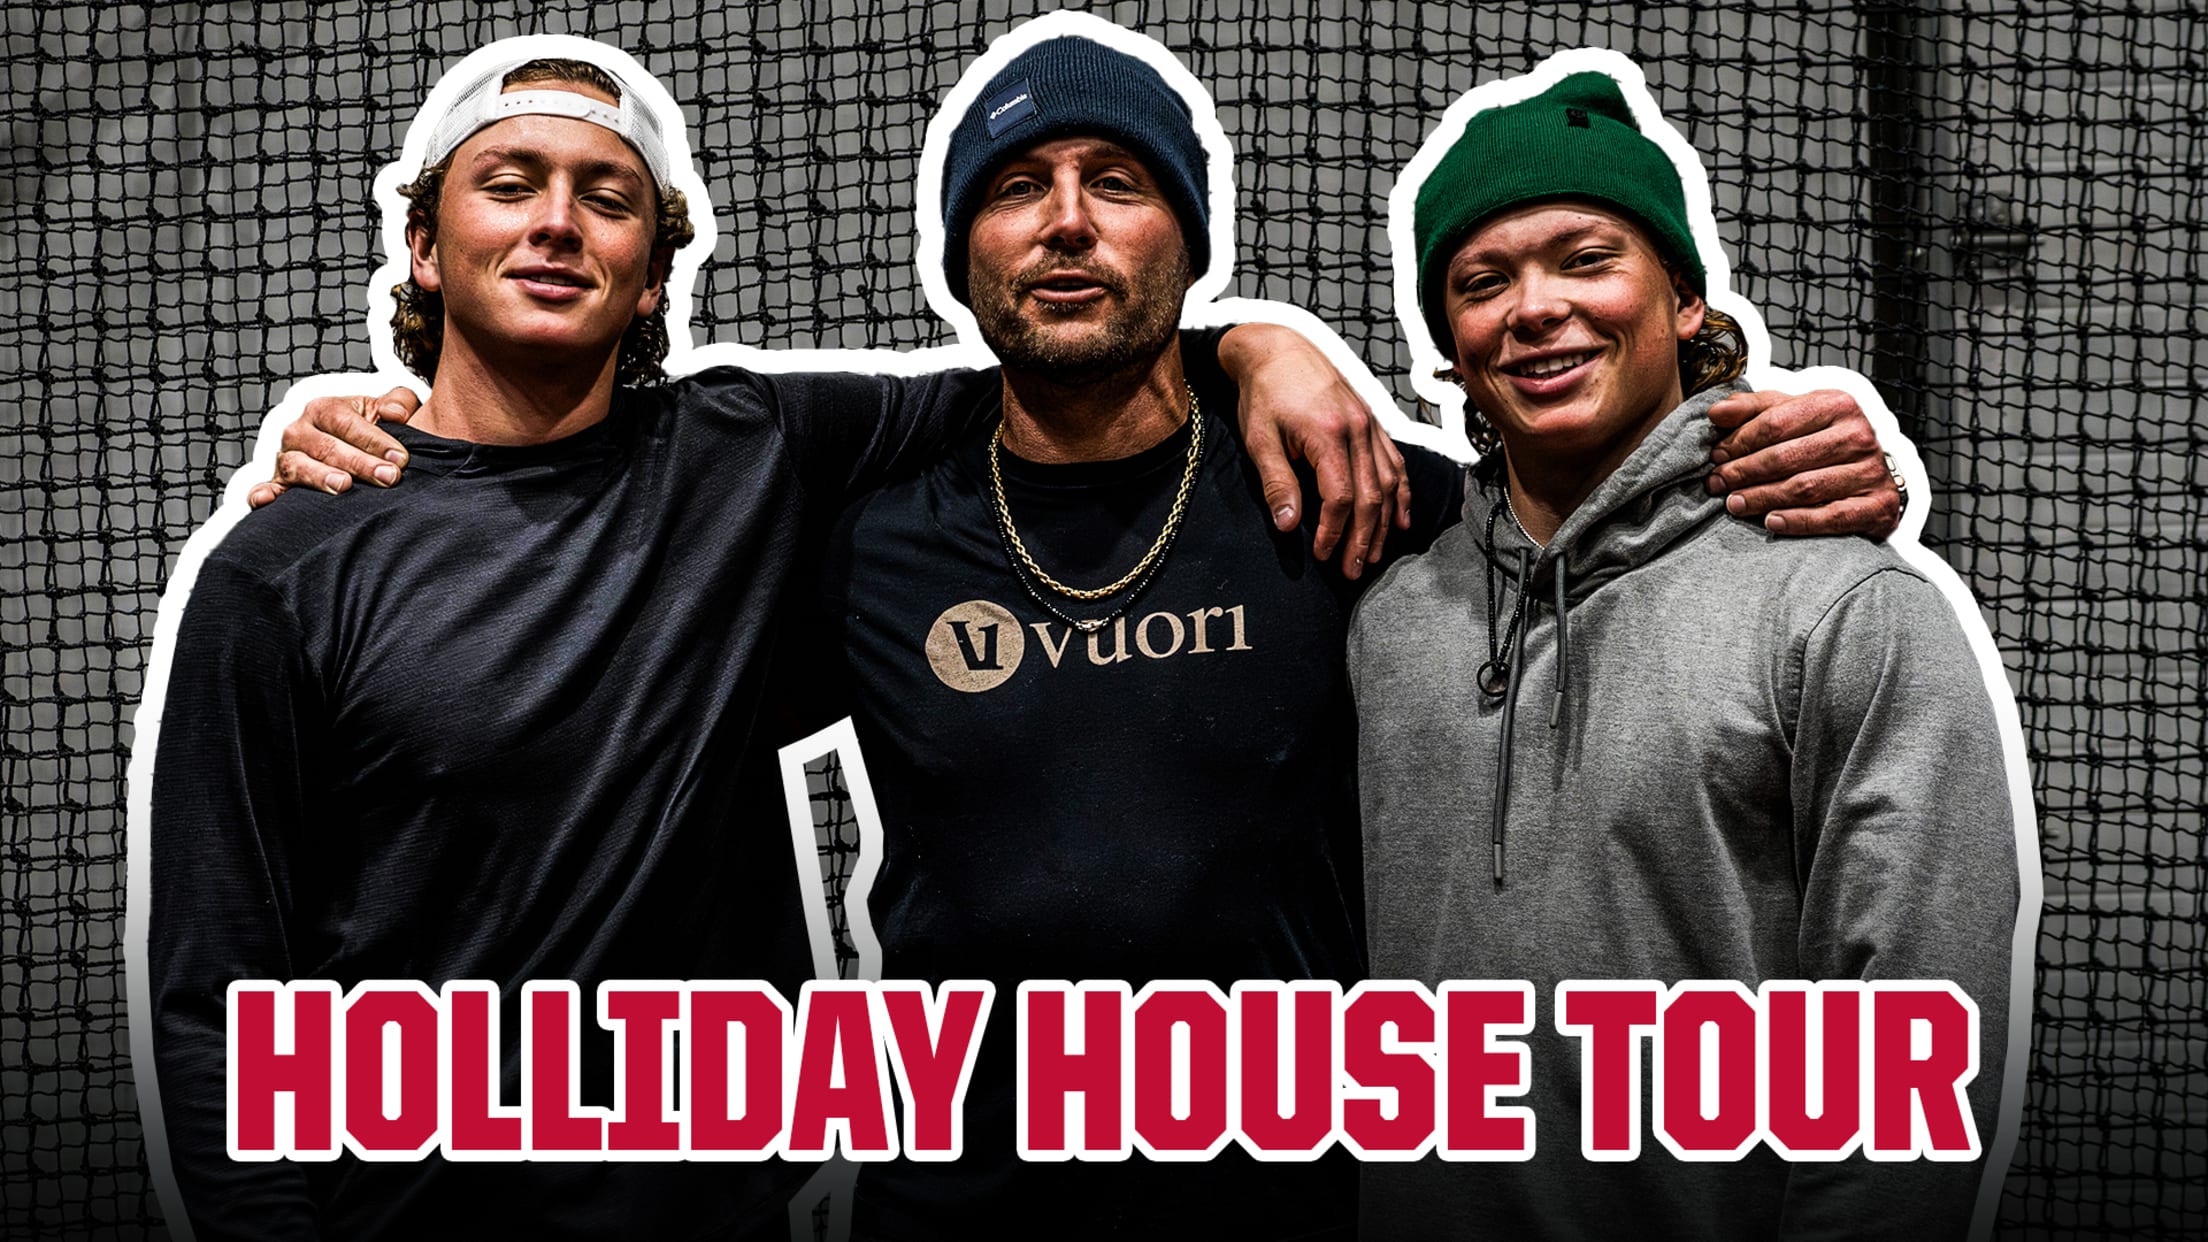 Tour the Holliday sports house